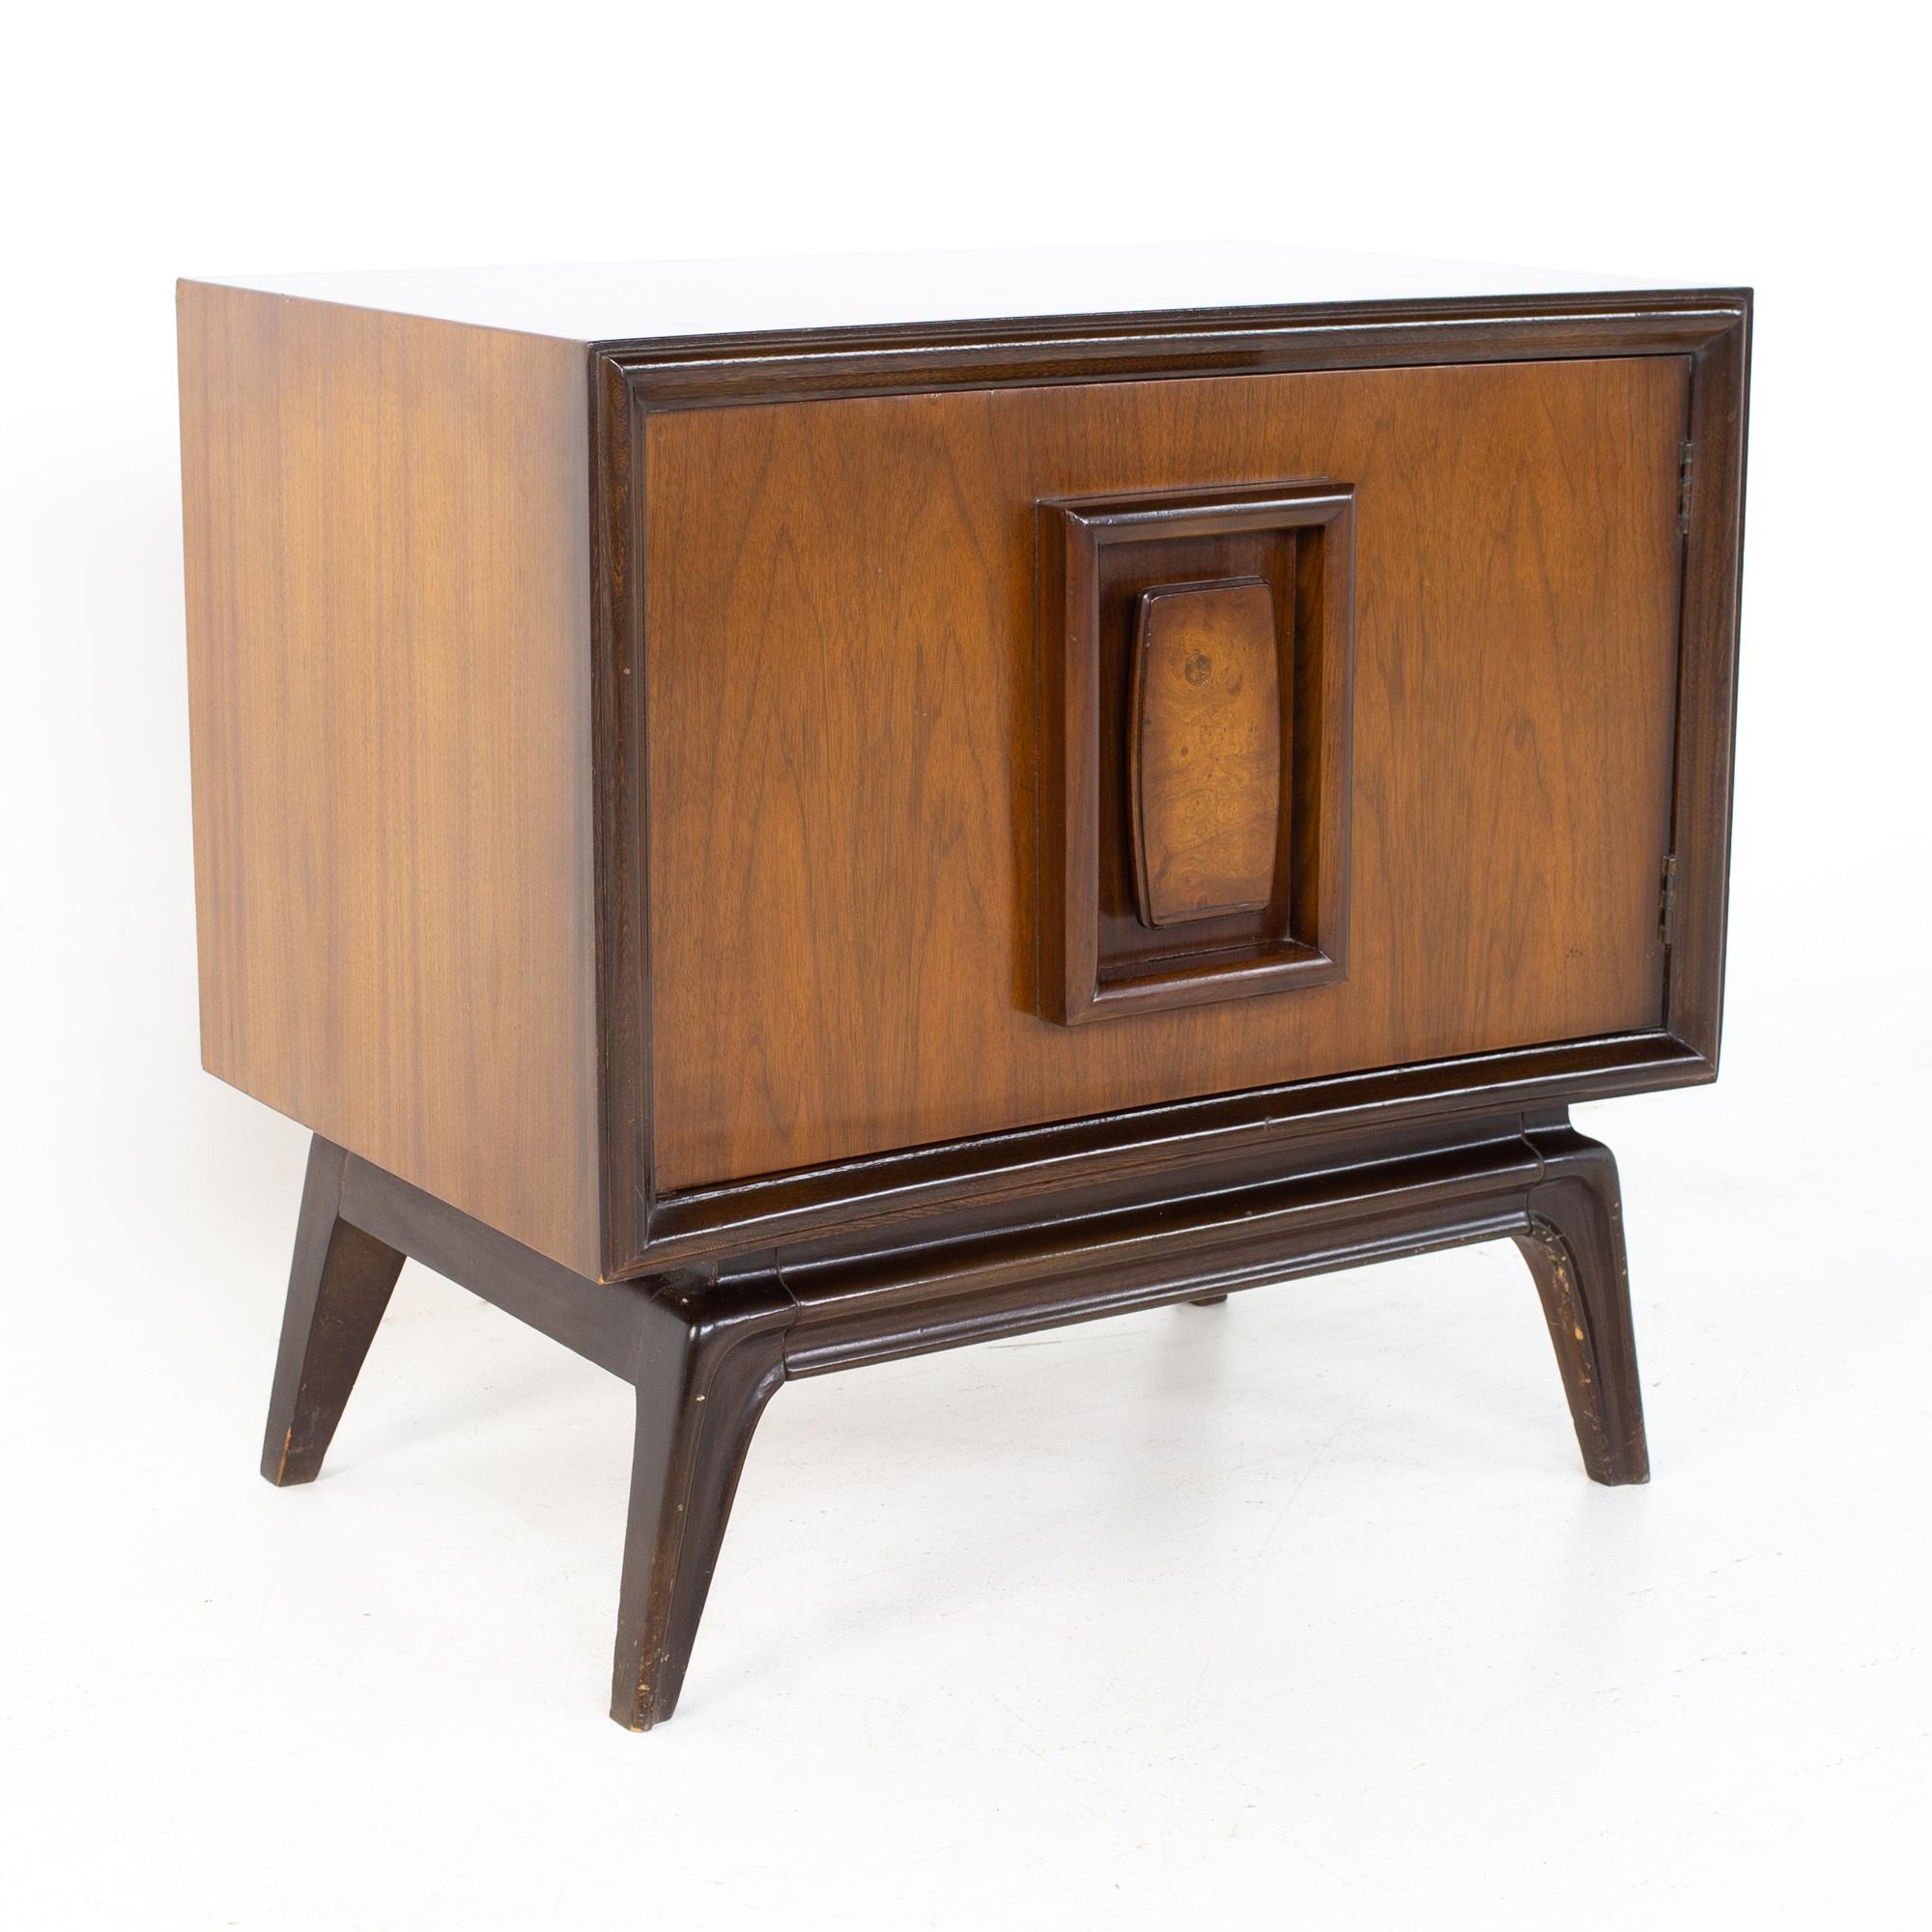 American Hoke Wood Products Mid Century Walnut and Burlwood Nightstands, a Pair